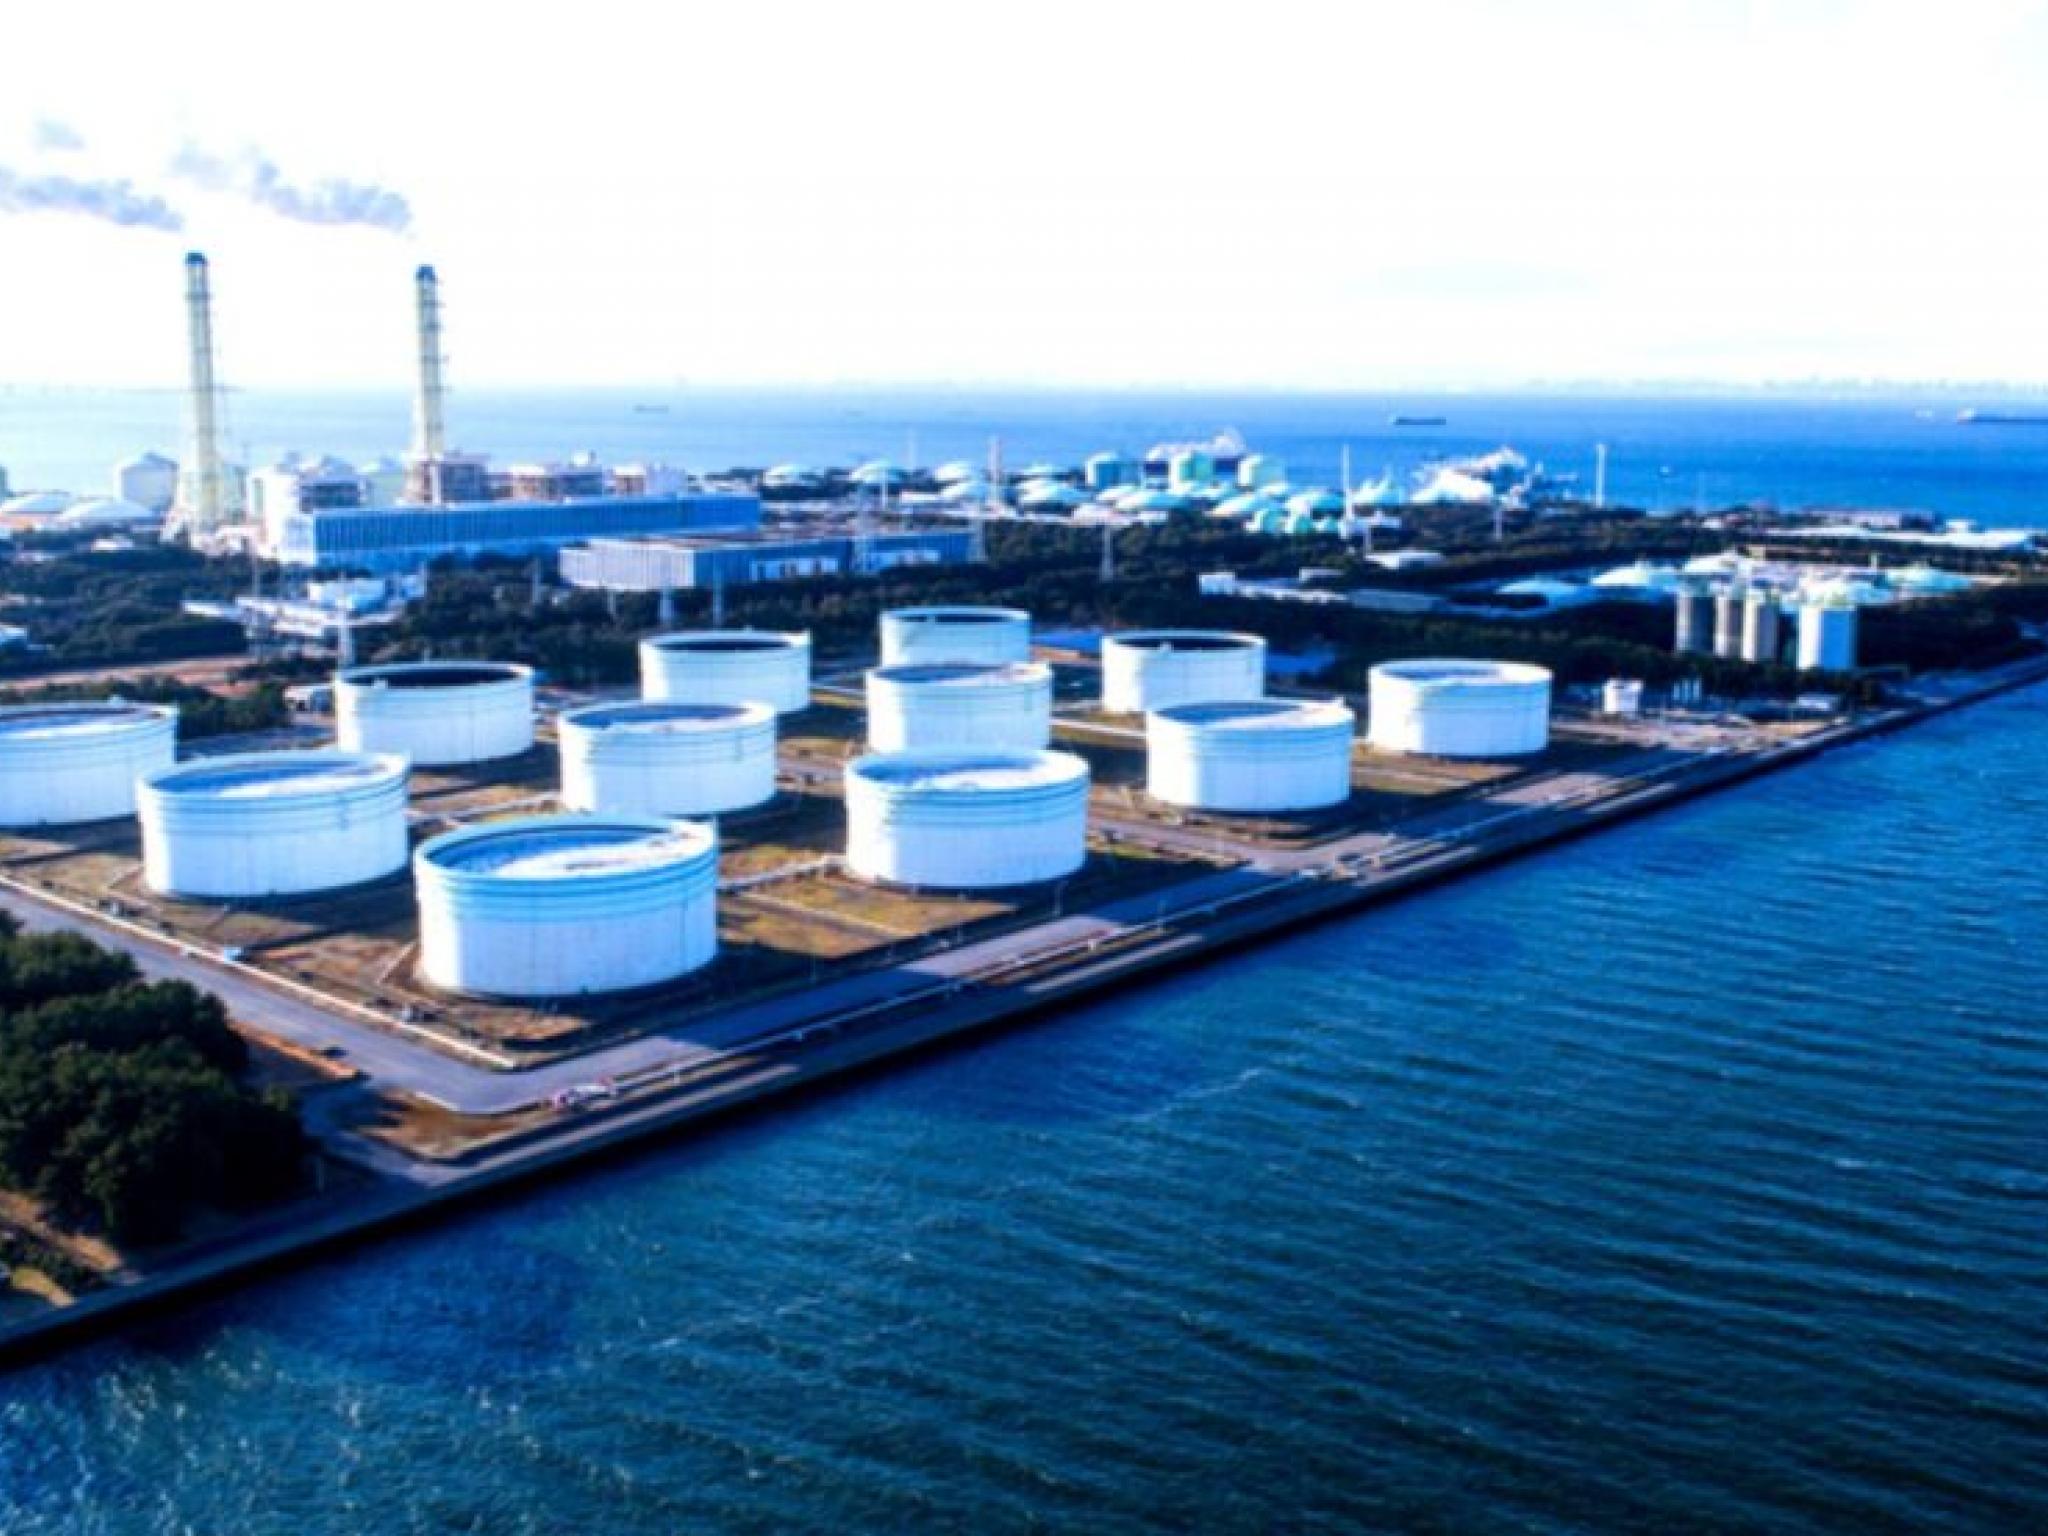  aramco-in-discussions-with-tellurian-and-nextdecade-on-lng-projects-report 